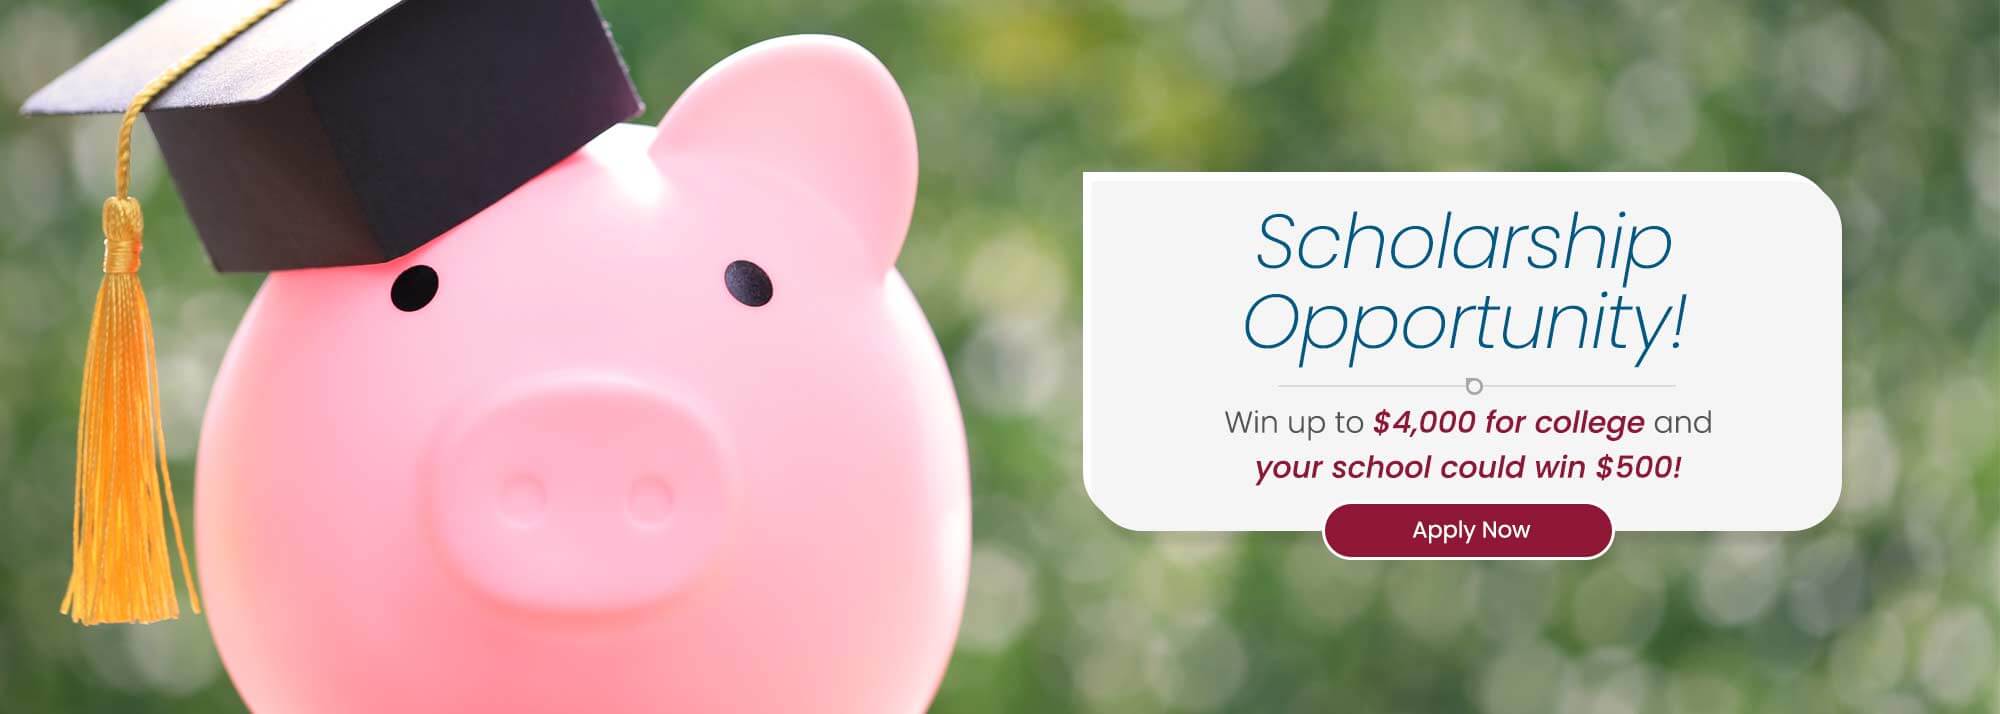 Scholarship Opportunity! Win up to $4,000 for college and your school could win $500! Apply Now